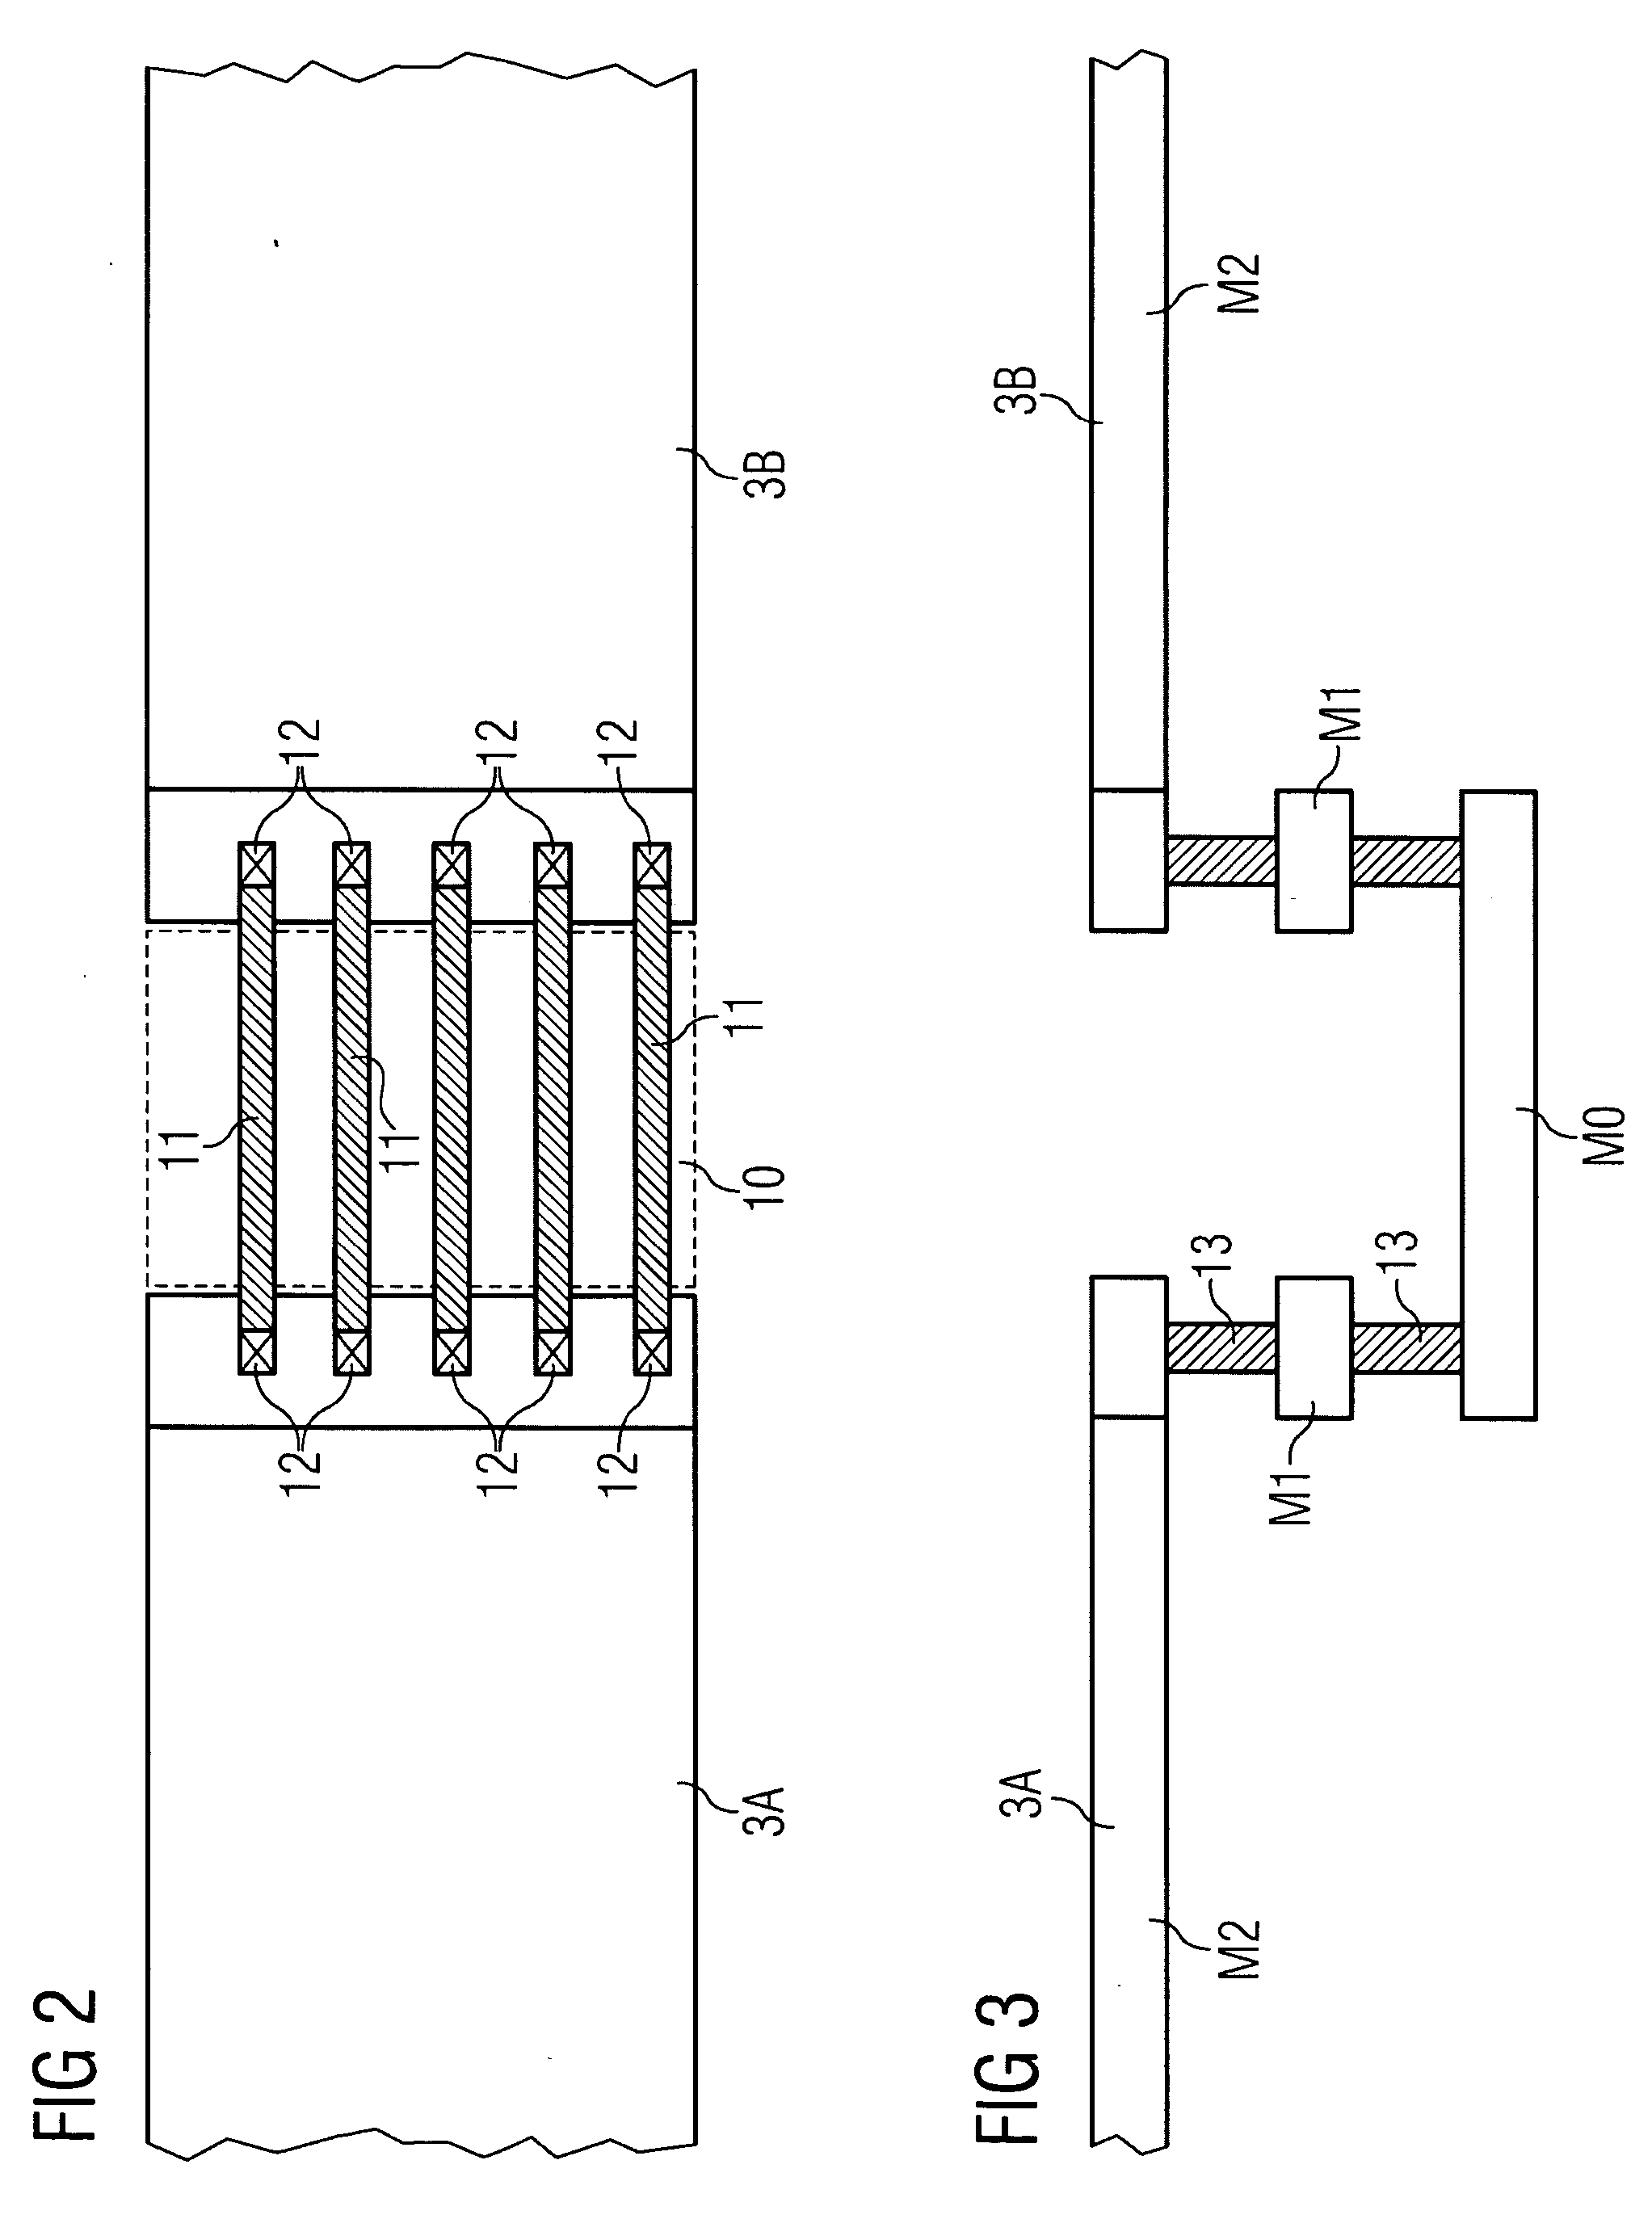 Integrated circuit having a plurality of output drivers